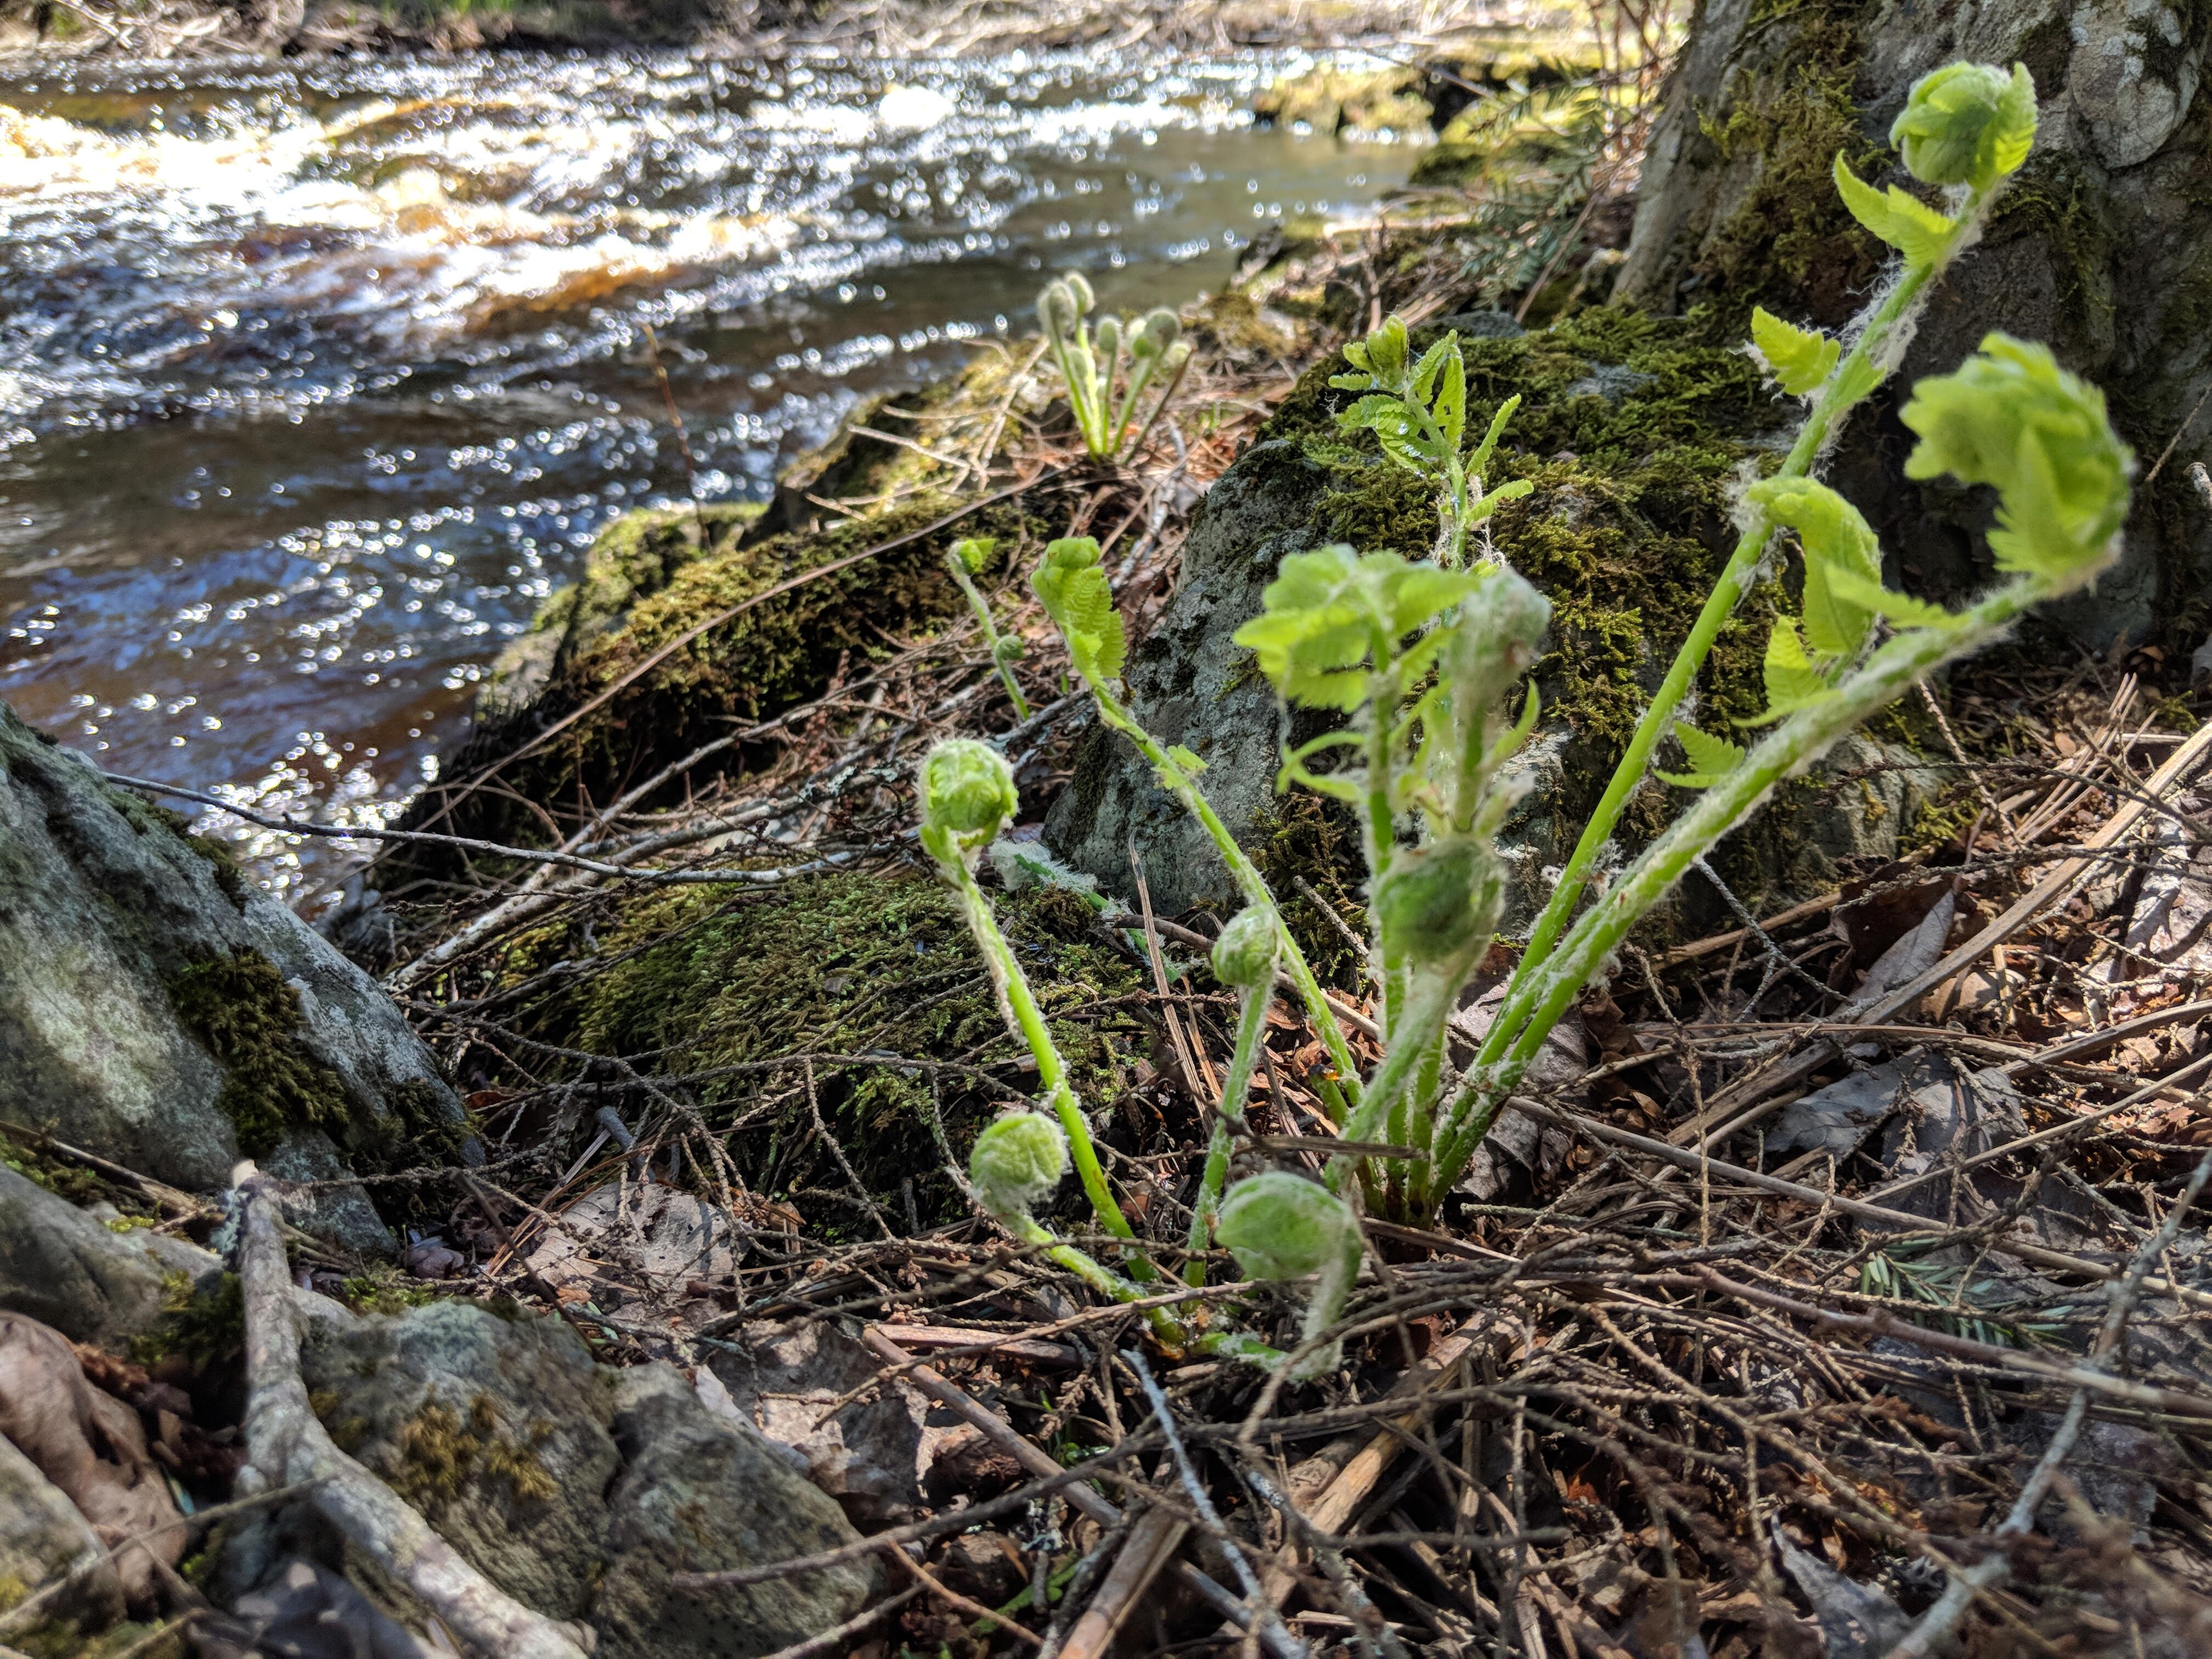 Spring ferns unfold on the banks of a stream.